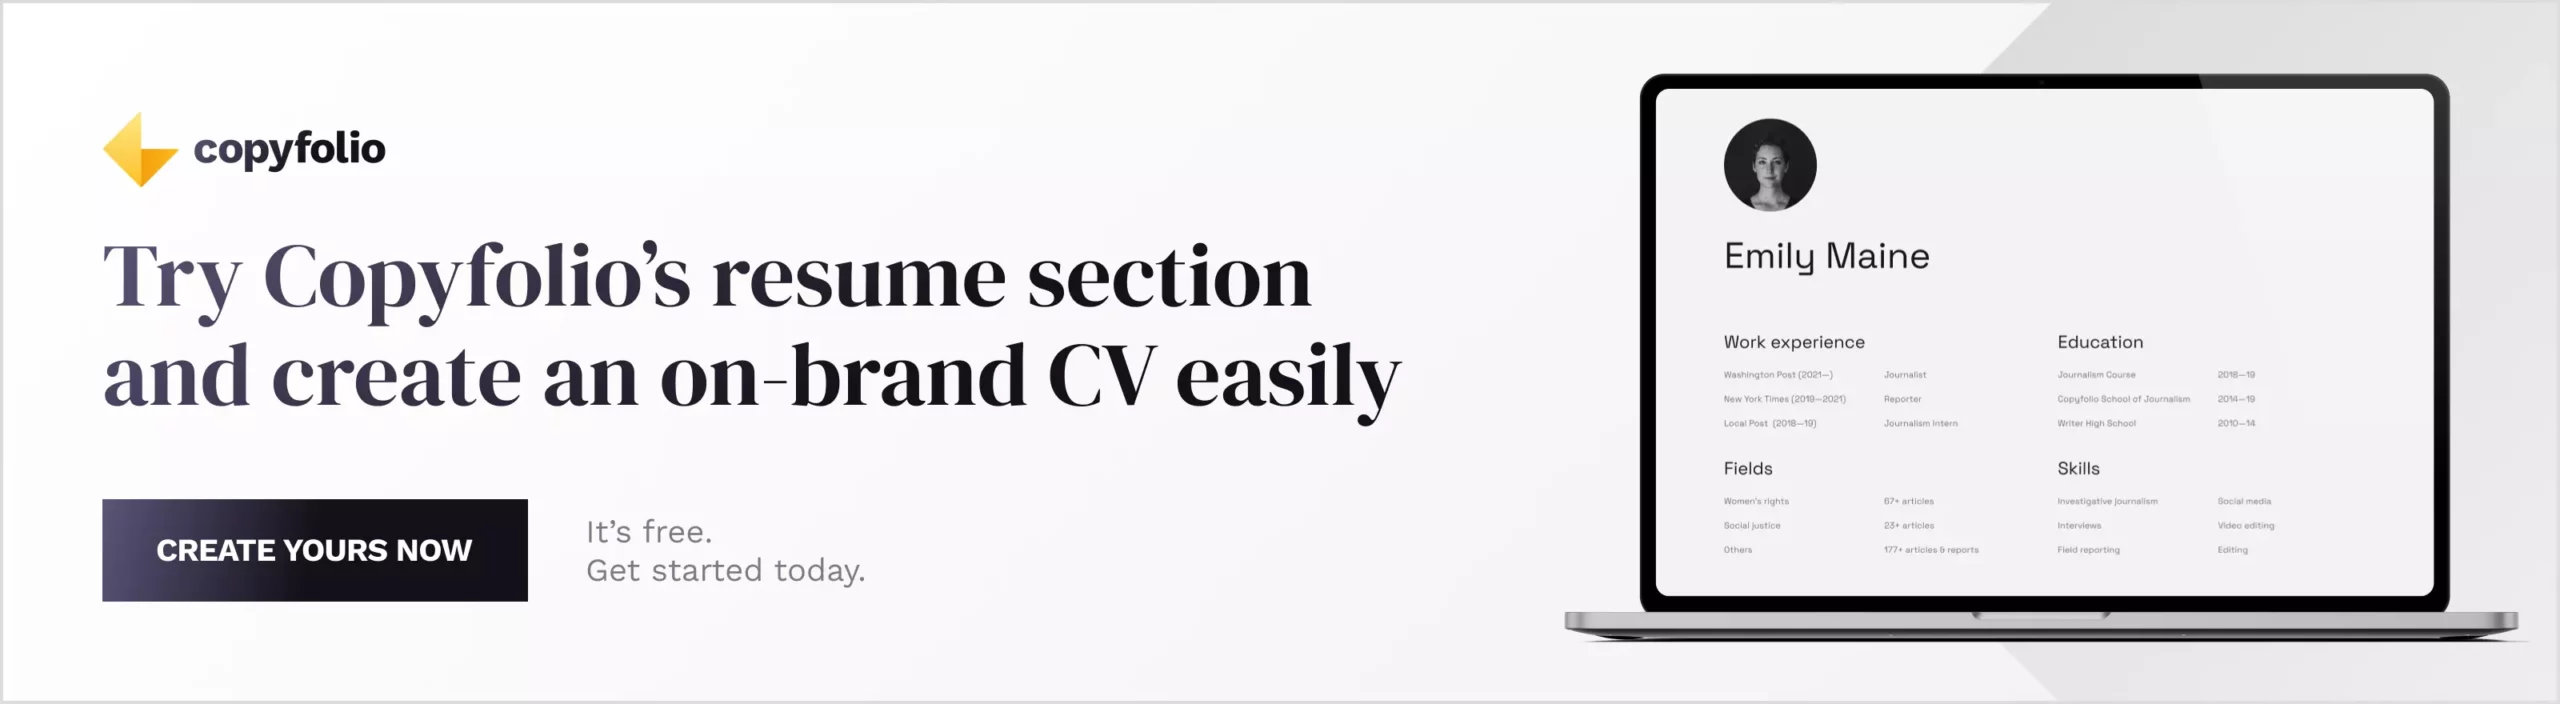 Try Copyfolio's resume section and create an on-brand CV easily. Create yours now.